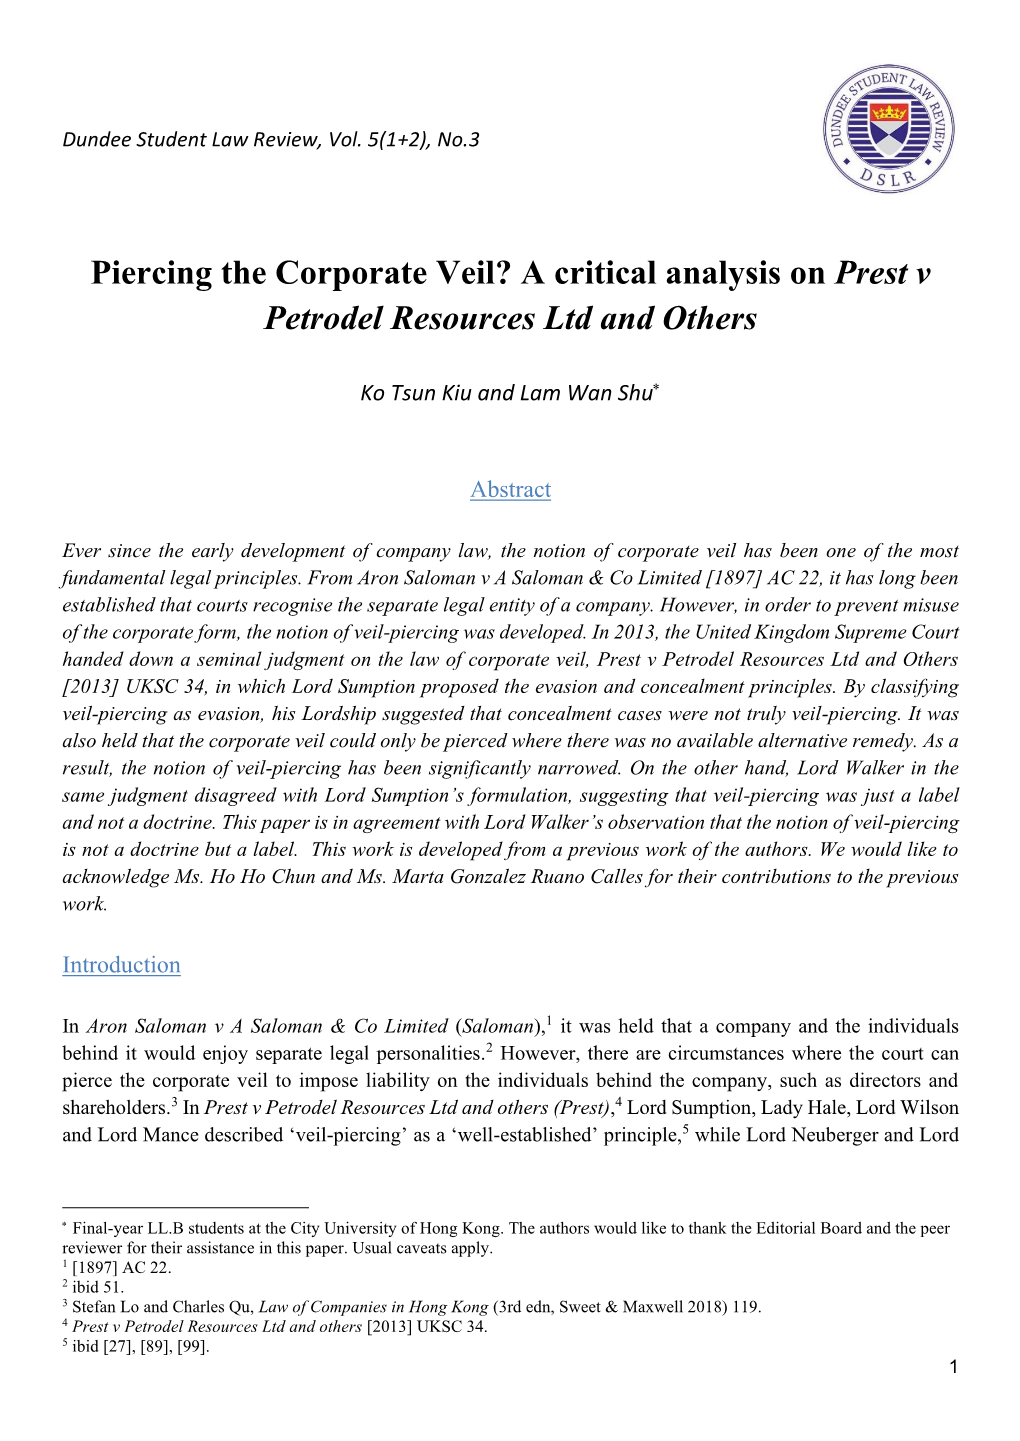 Piercing the Corporate Veil? a Critical Analysis on Prest V Petrodel Resources Ltd and Others